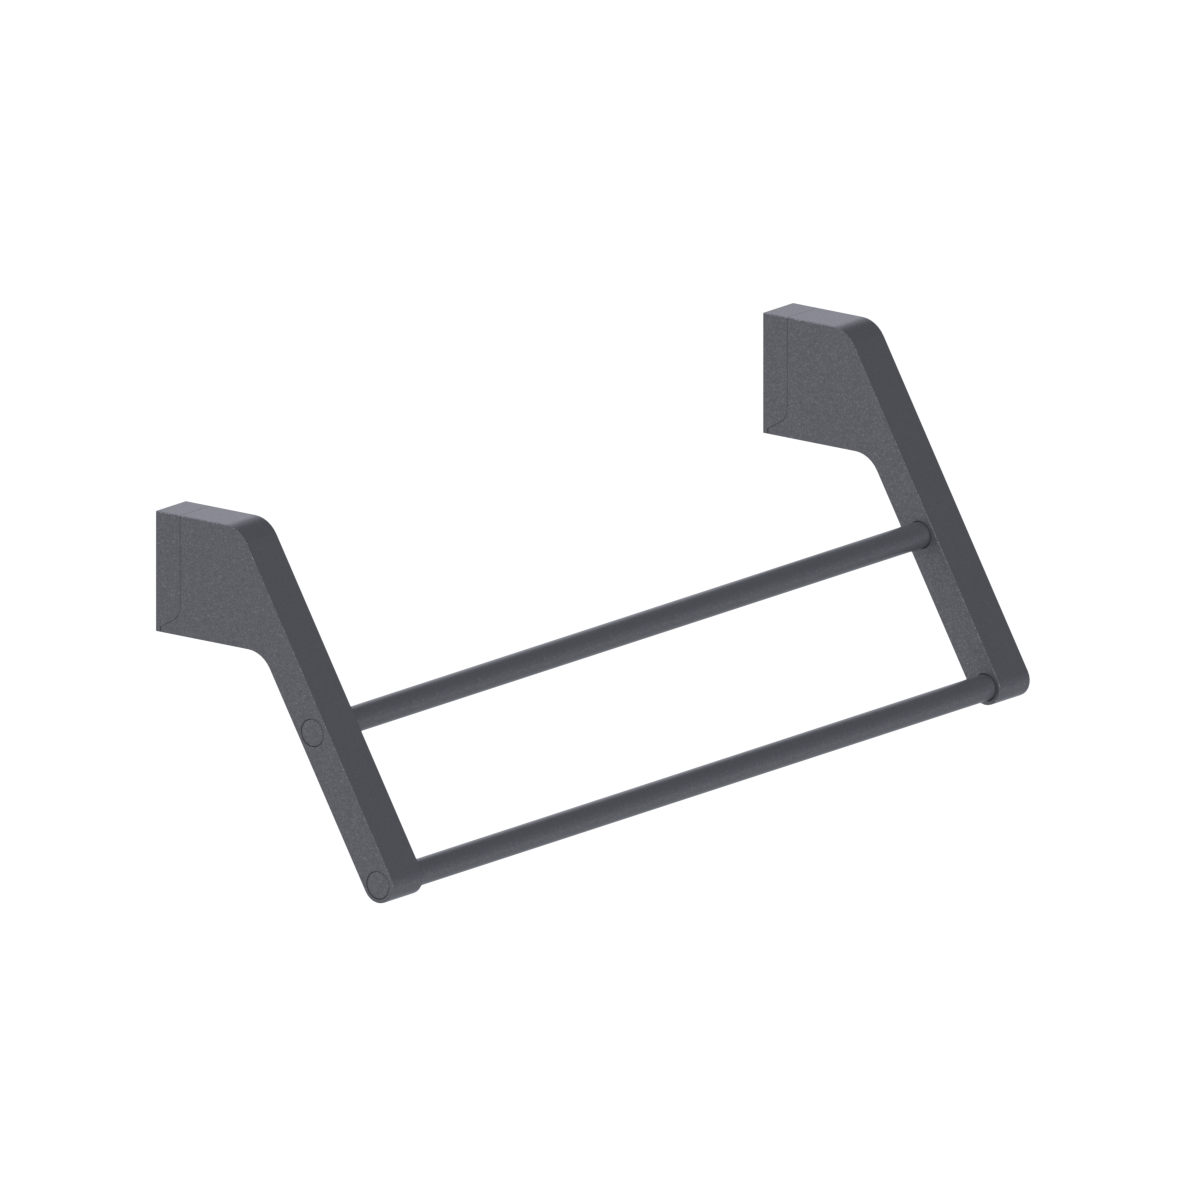 Cavere Care FlexTowel holder, for wall mounting, L = 500 mm, Cavere Metallic anthracite